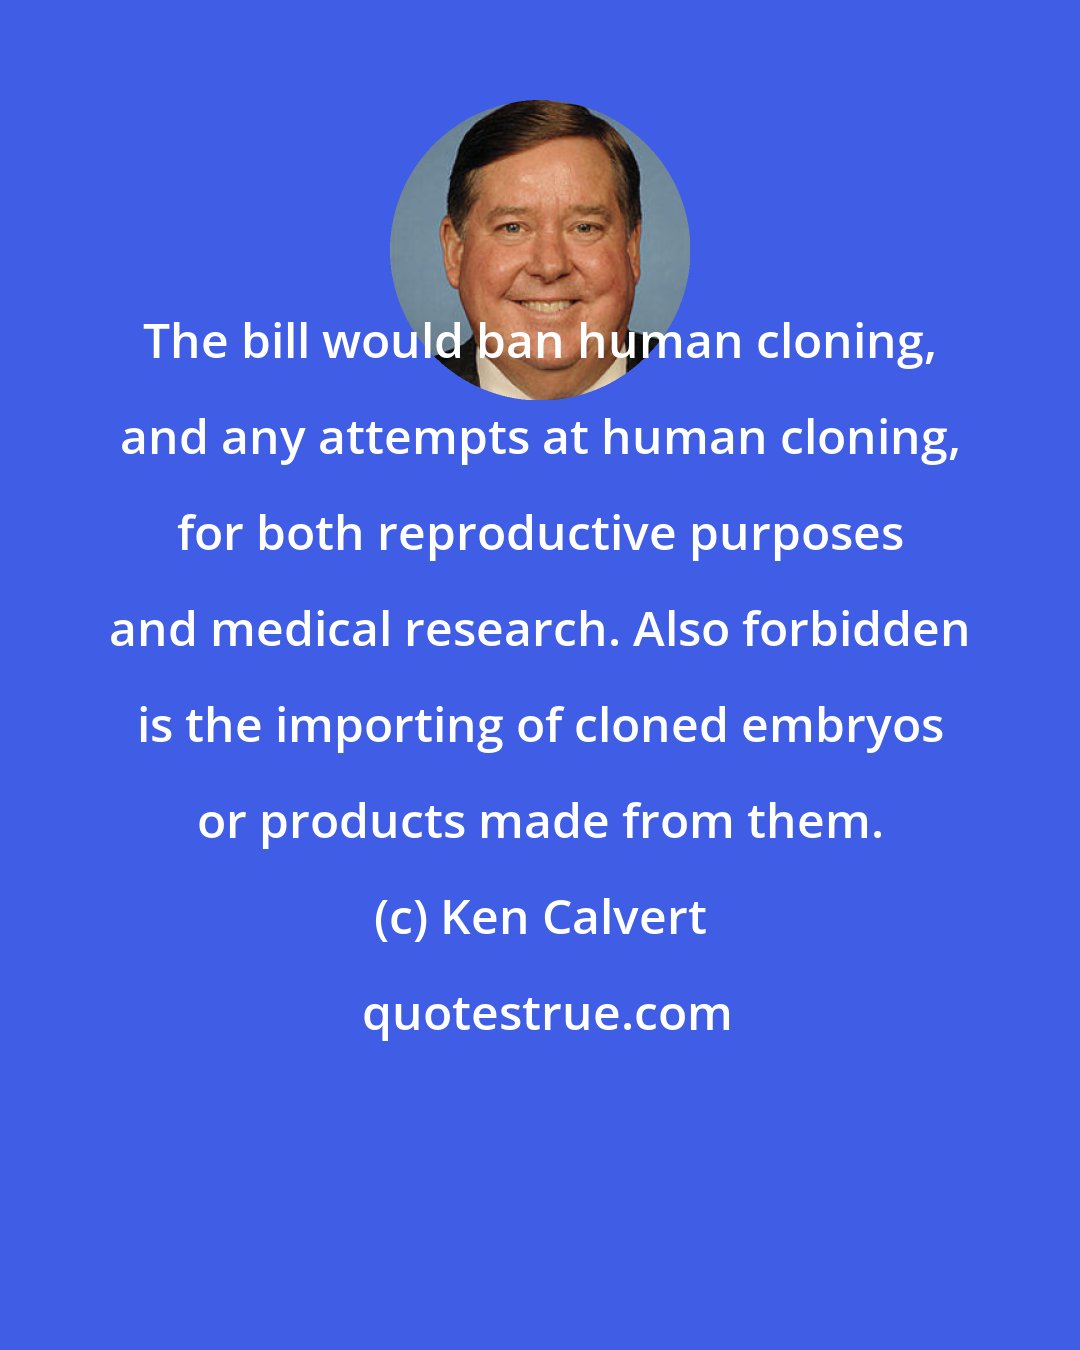 Ken Calvert: The bill would ban human cloning, and any attempts at human cloning, for both reproductive purposes and medical research. Also forbidden is the importing of cloned embryos or products made from them.